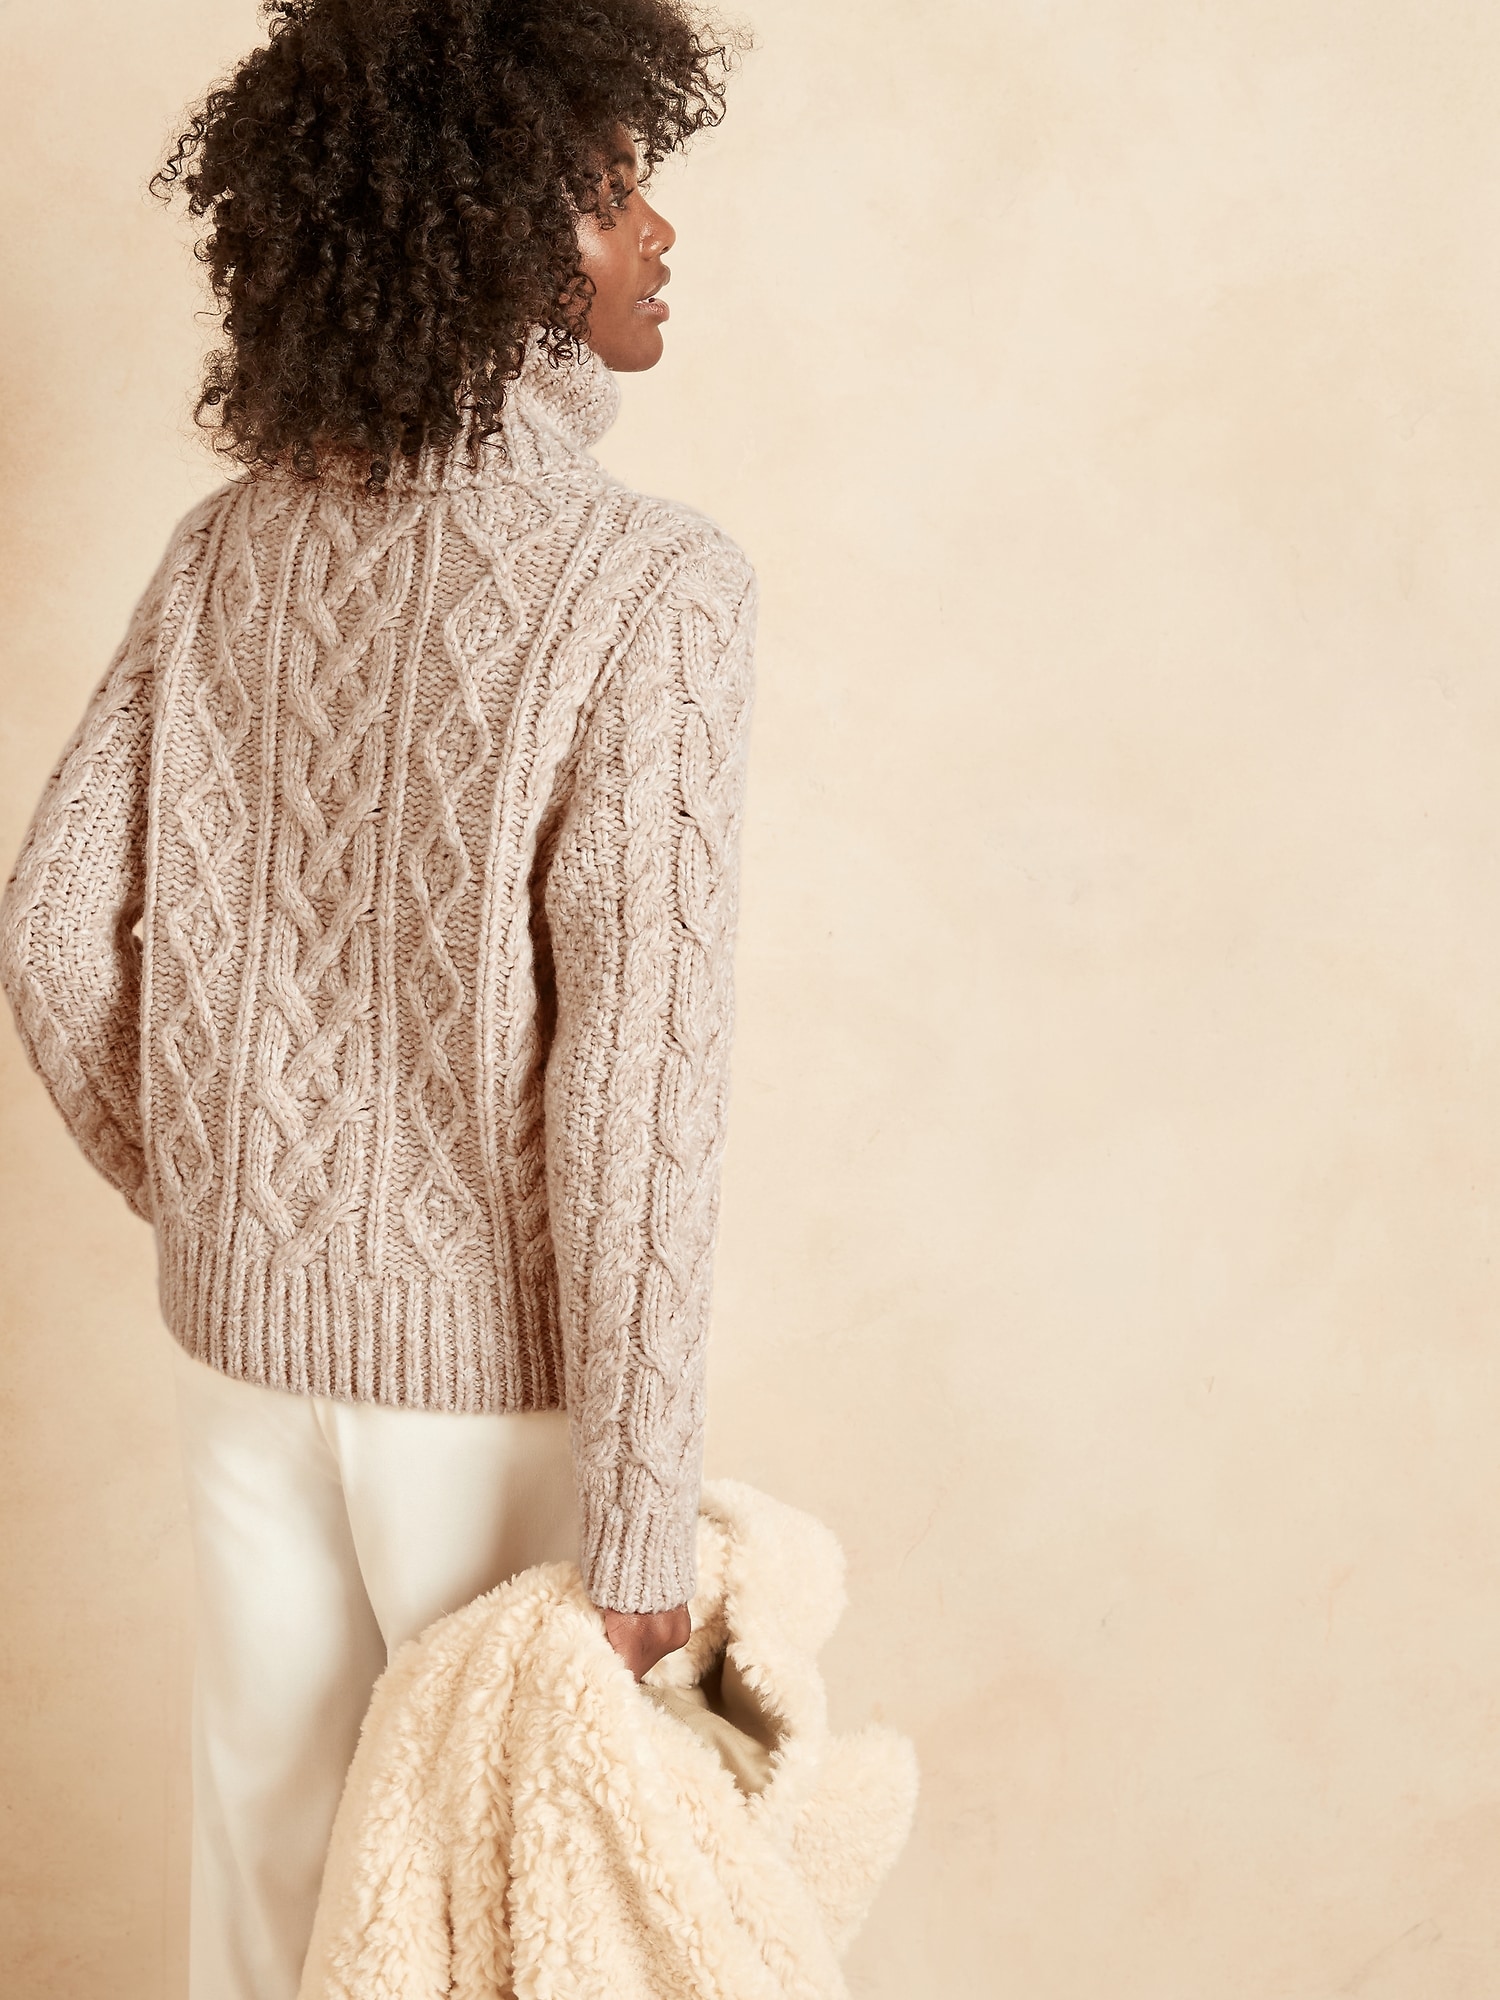 Cable-Knit Turtleneck Sweater | Banana Republic